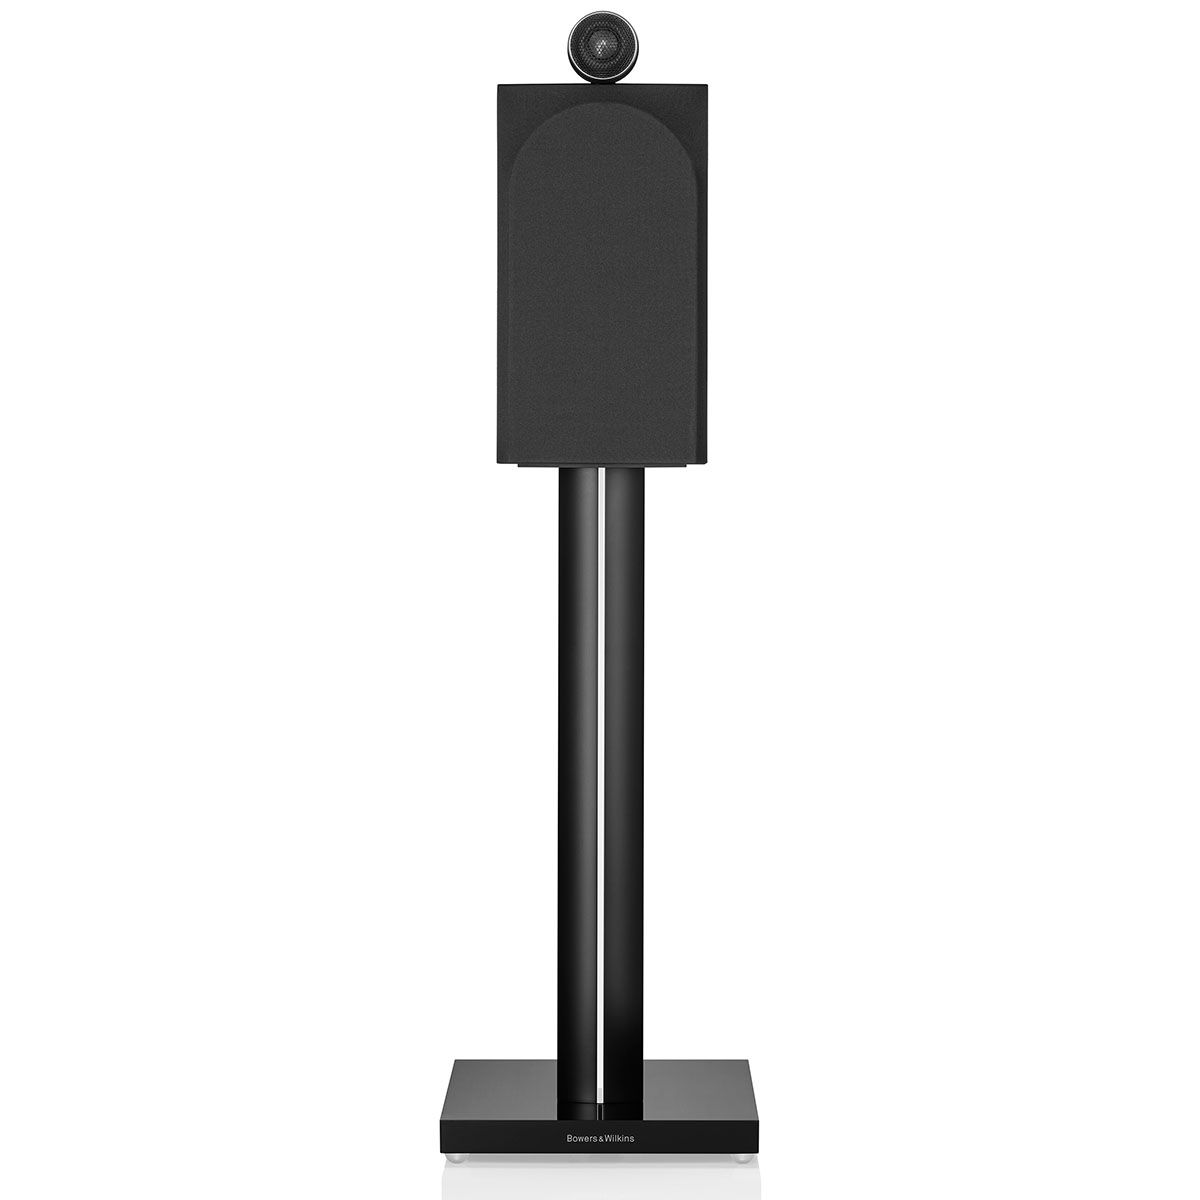 Bowers & Wilkins 705 S3 Gloss Black on stand mount with grille